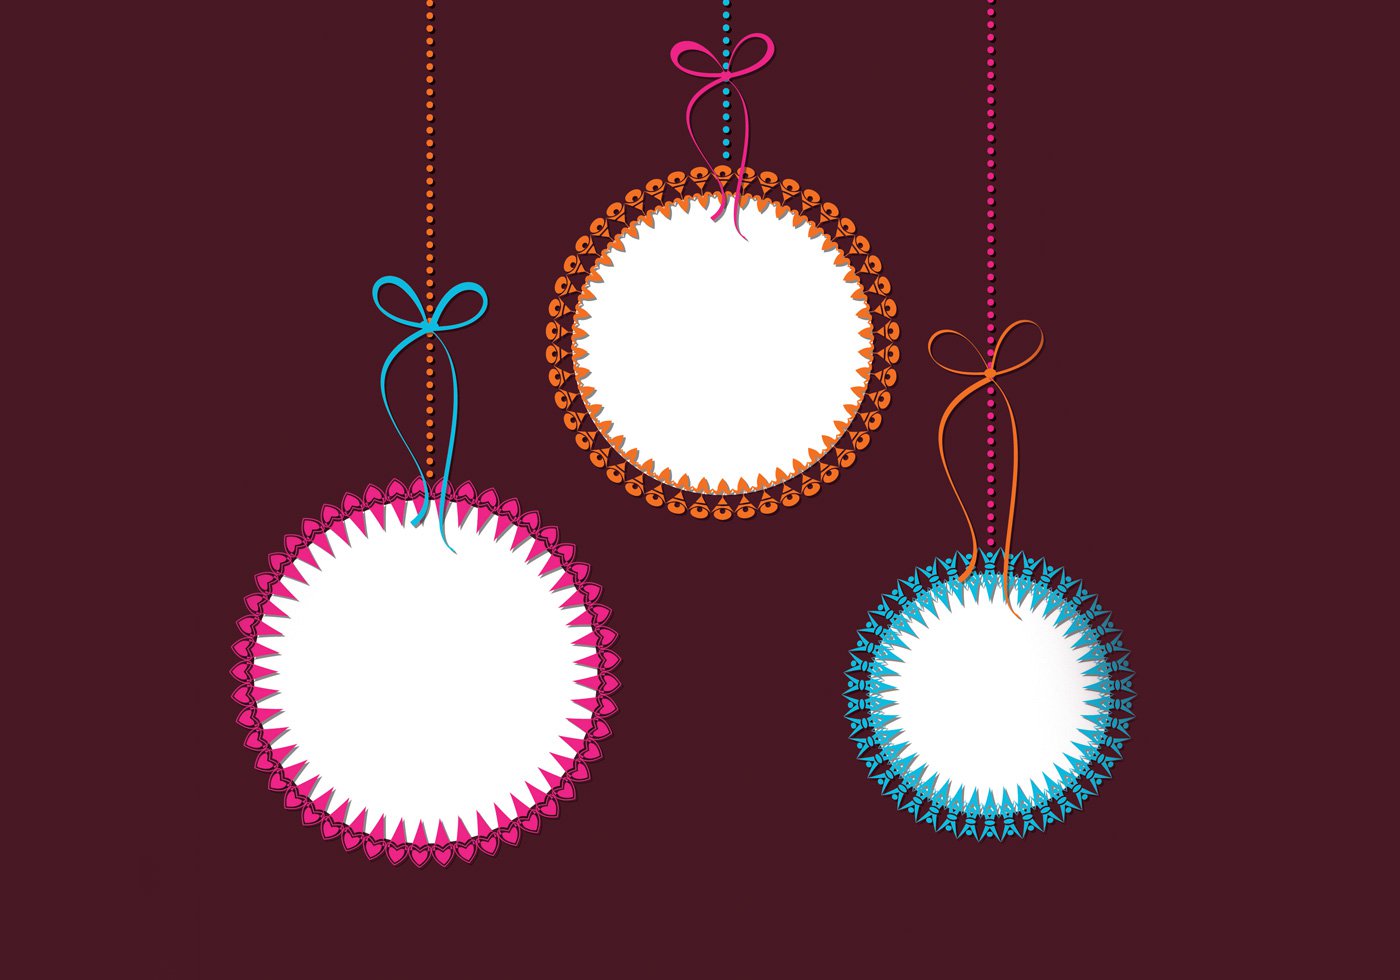 Funky Christmas Ornament Wallpaper Photoshop Brushes At